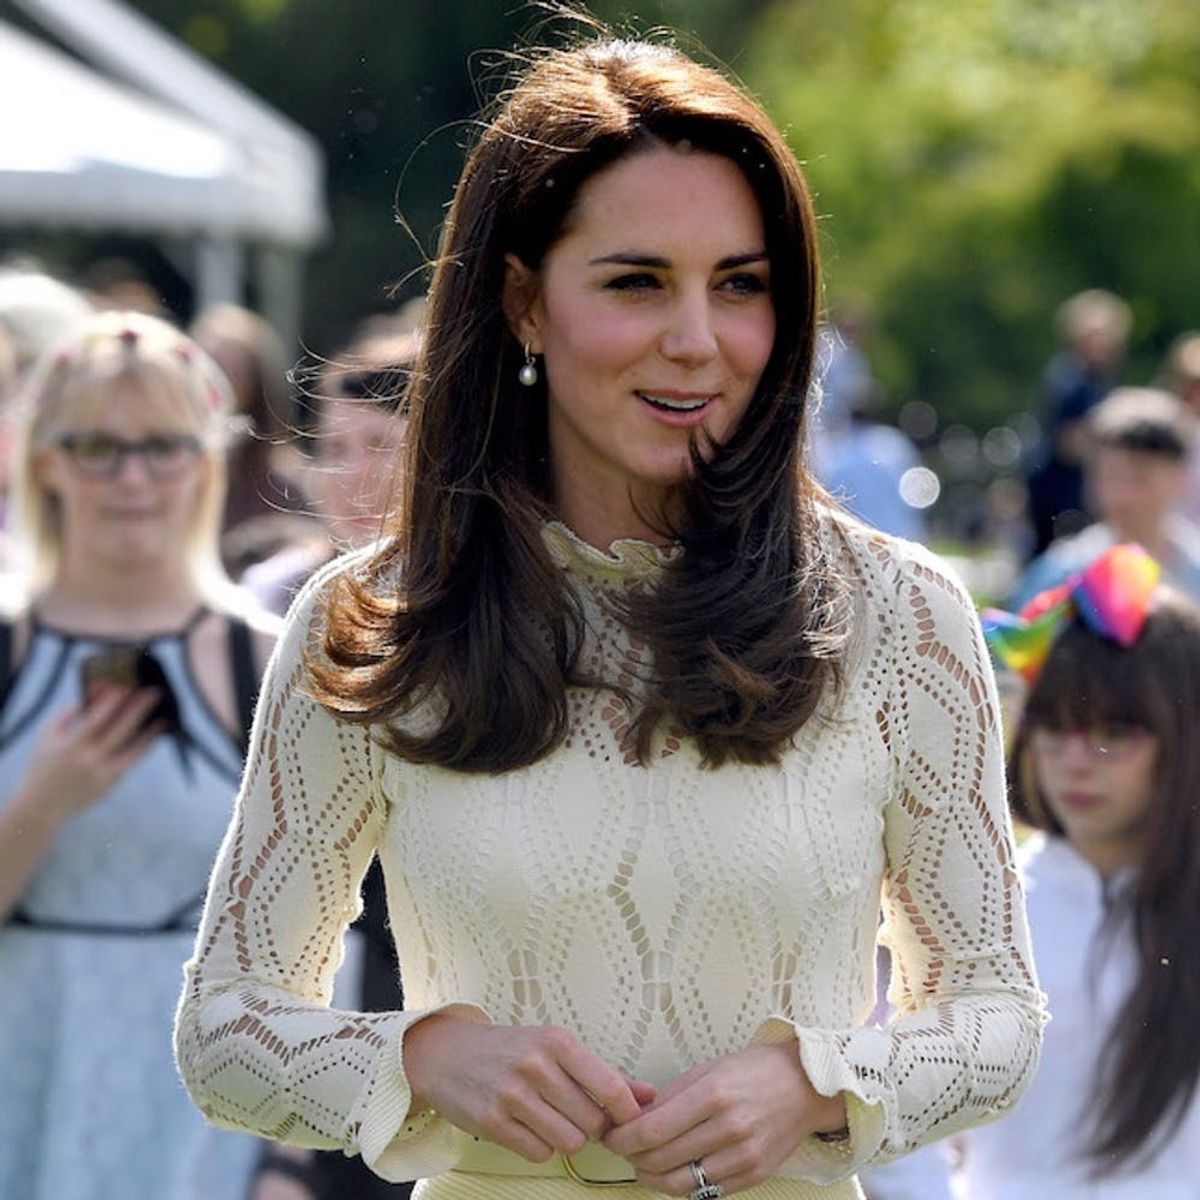 Kate Middletonâ€™s Spring Lace Dress Is Our Favorite Look Sheâ€™s Ever Recycled